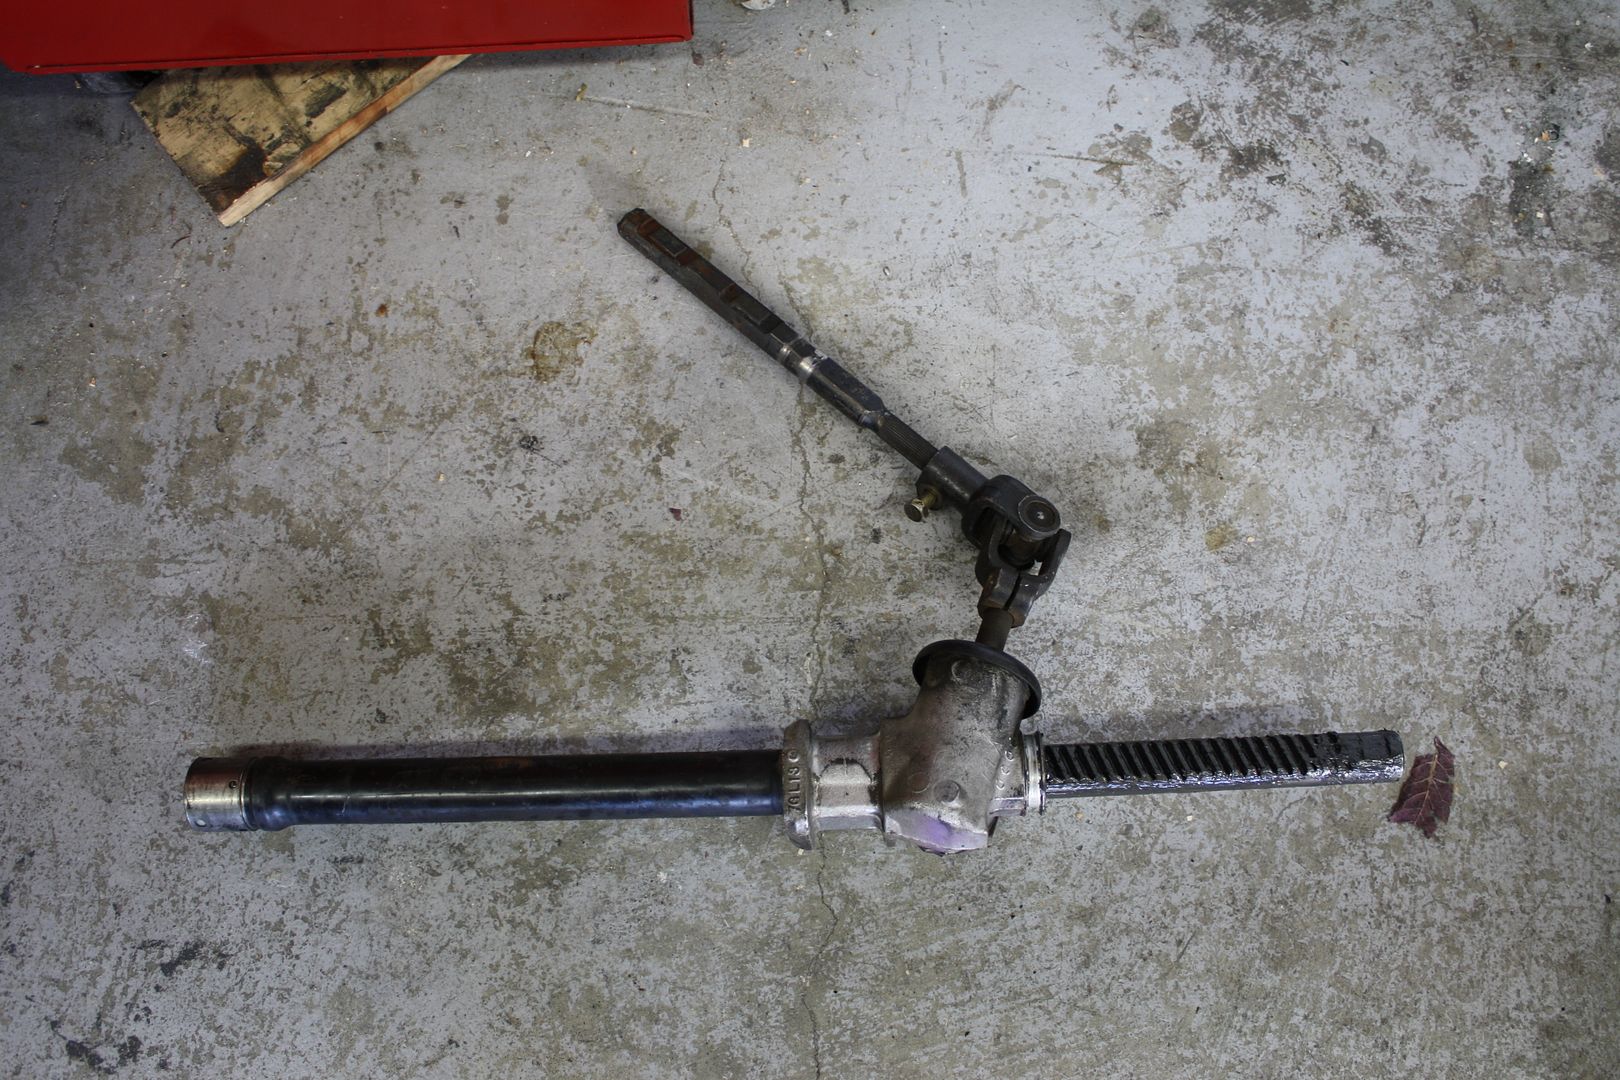 NORCAL: AW11 Mr2 Manual Steering Rack